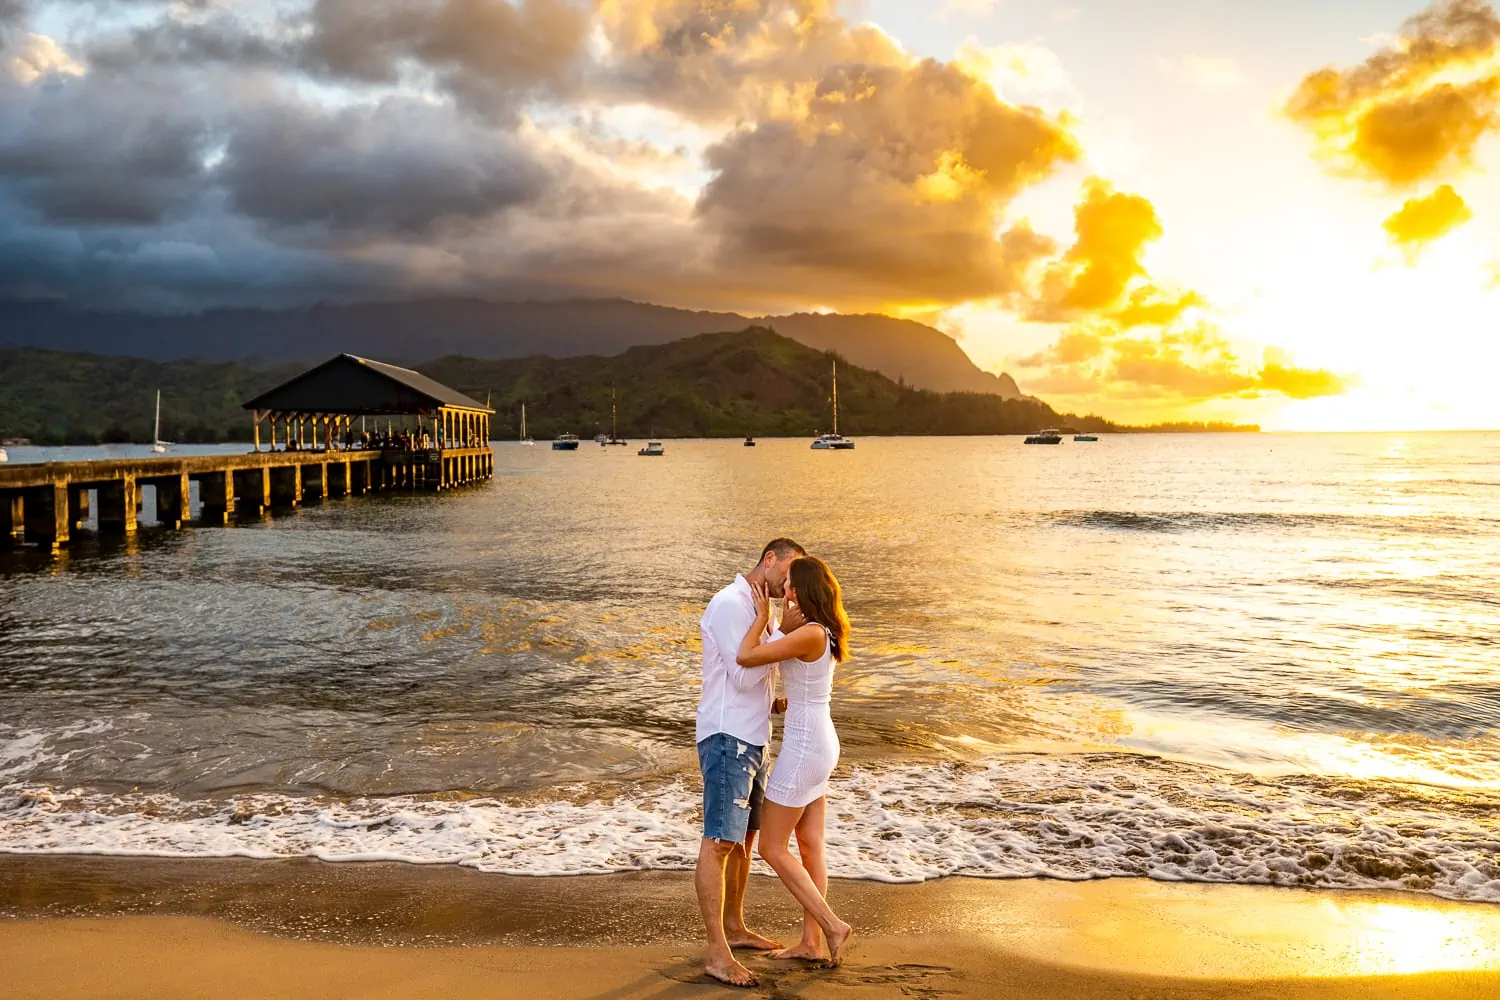 As the sun sets in Hanalei bay, an elopement couple shares their first kiss in this beautiful beach location.